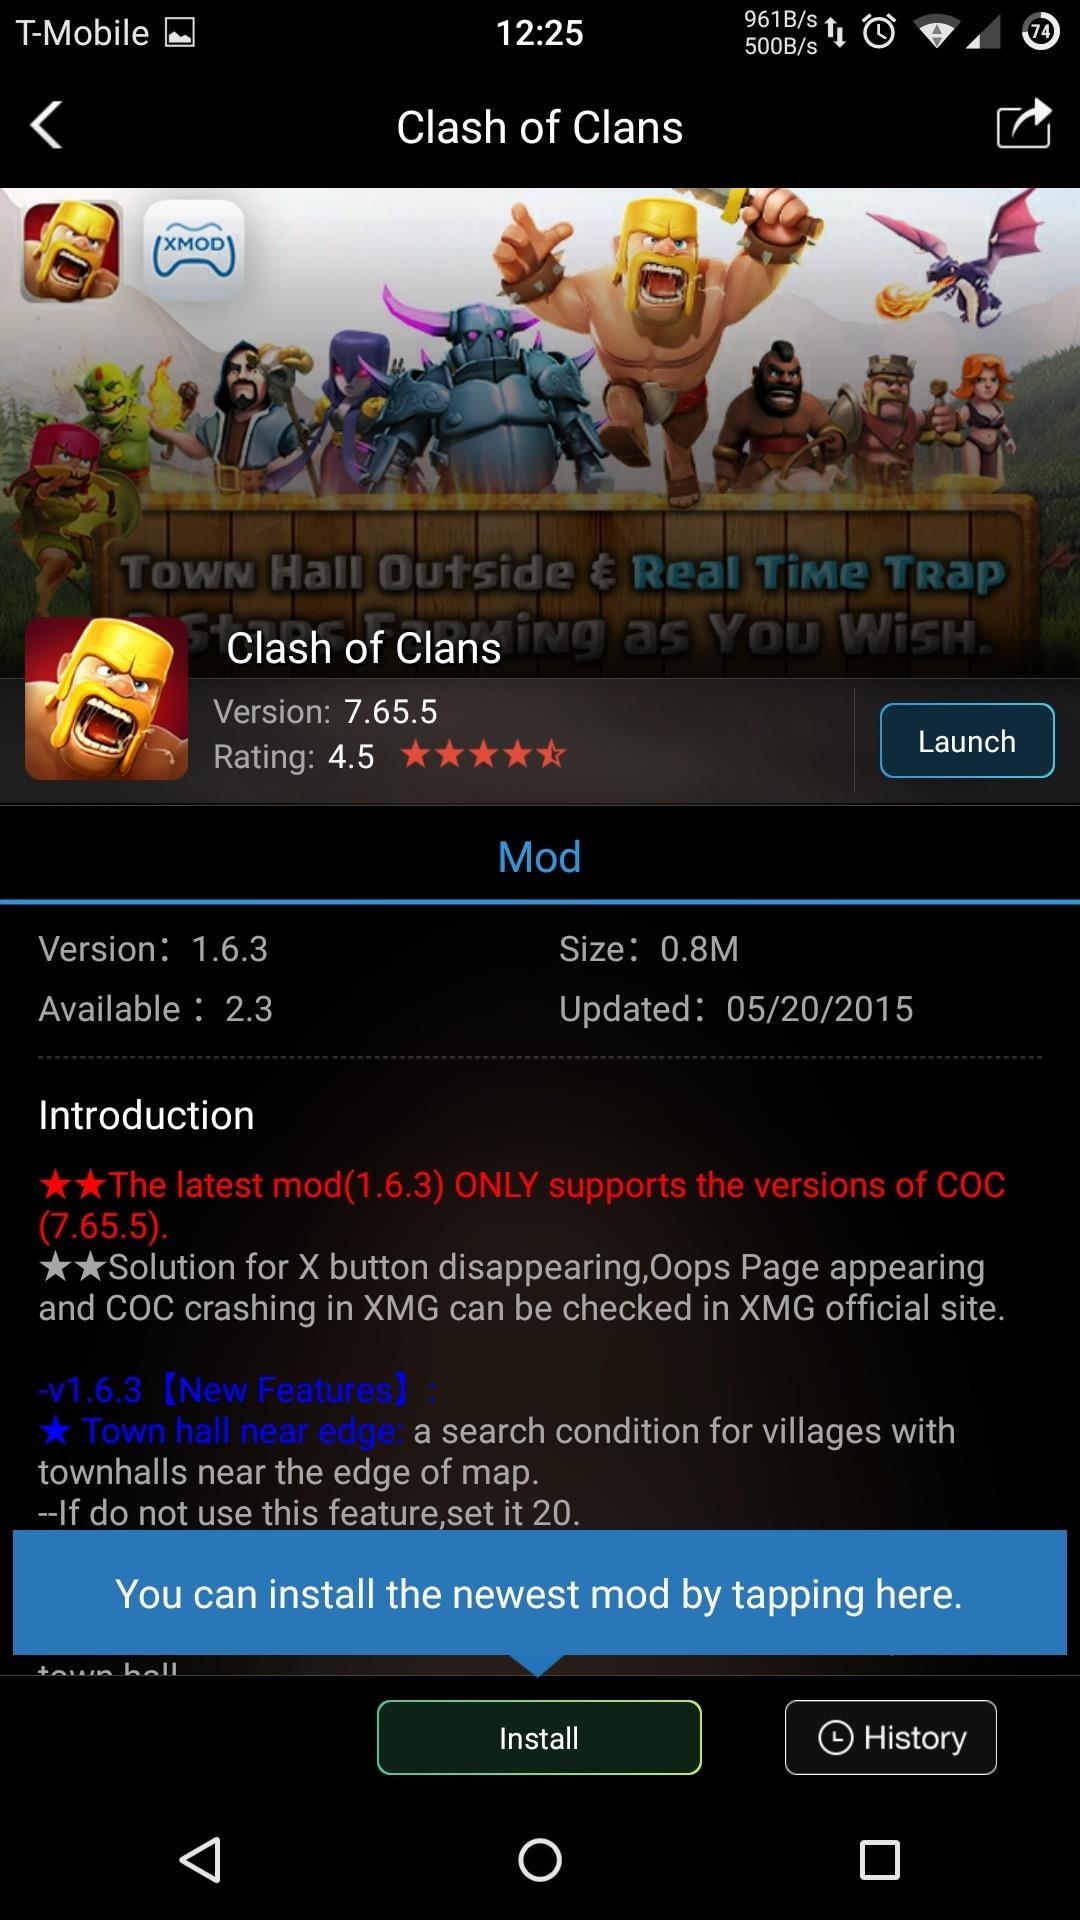 How to Max Out Your Clash of Clans Village Faster on Android